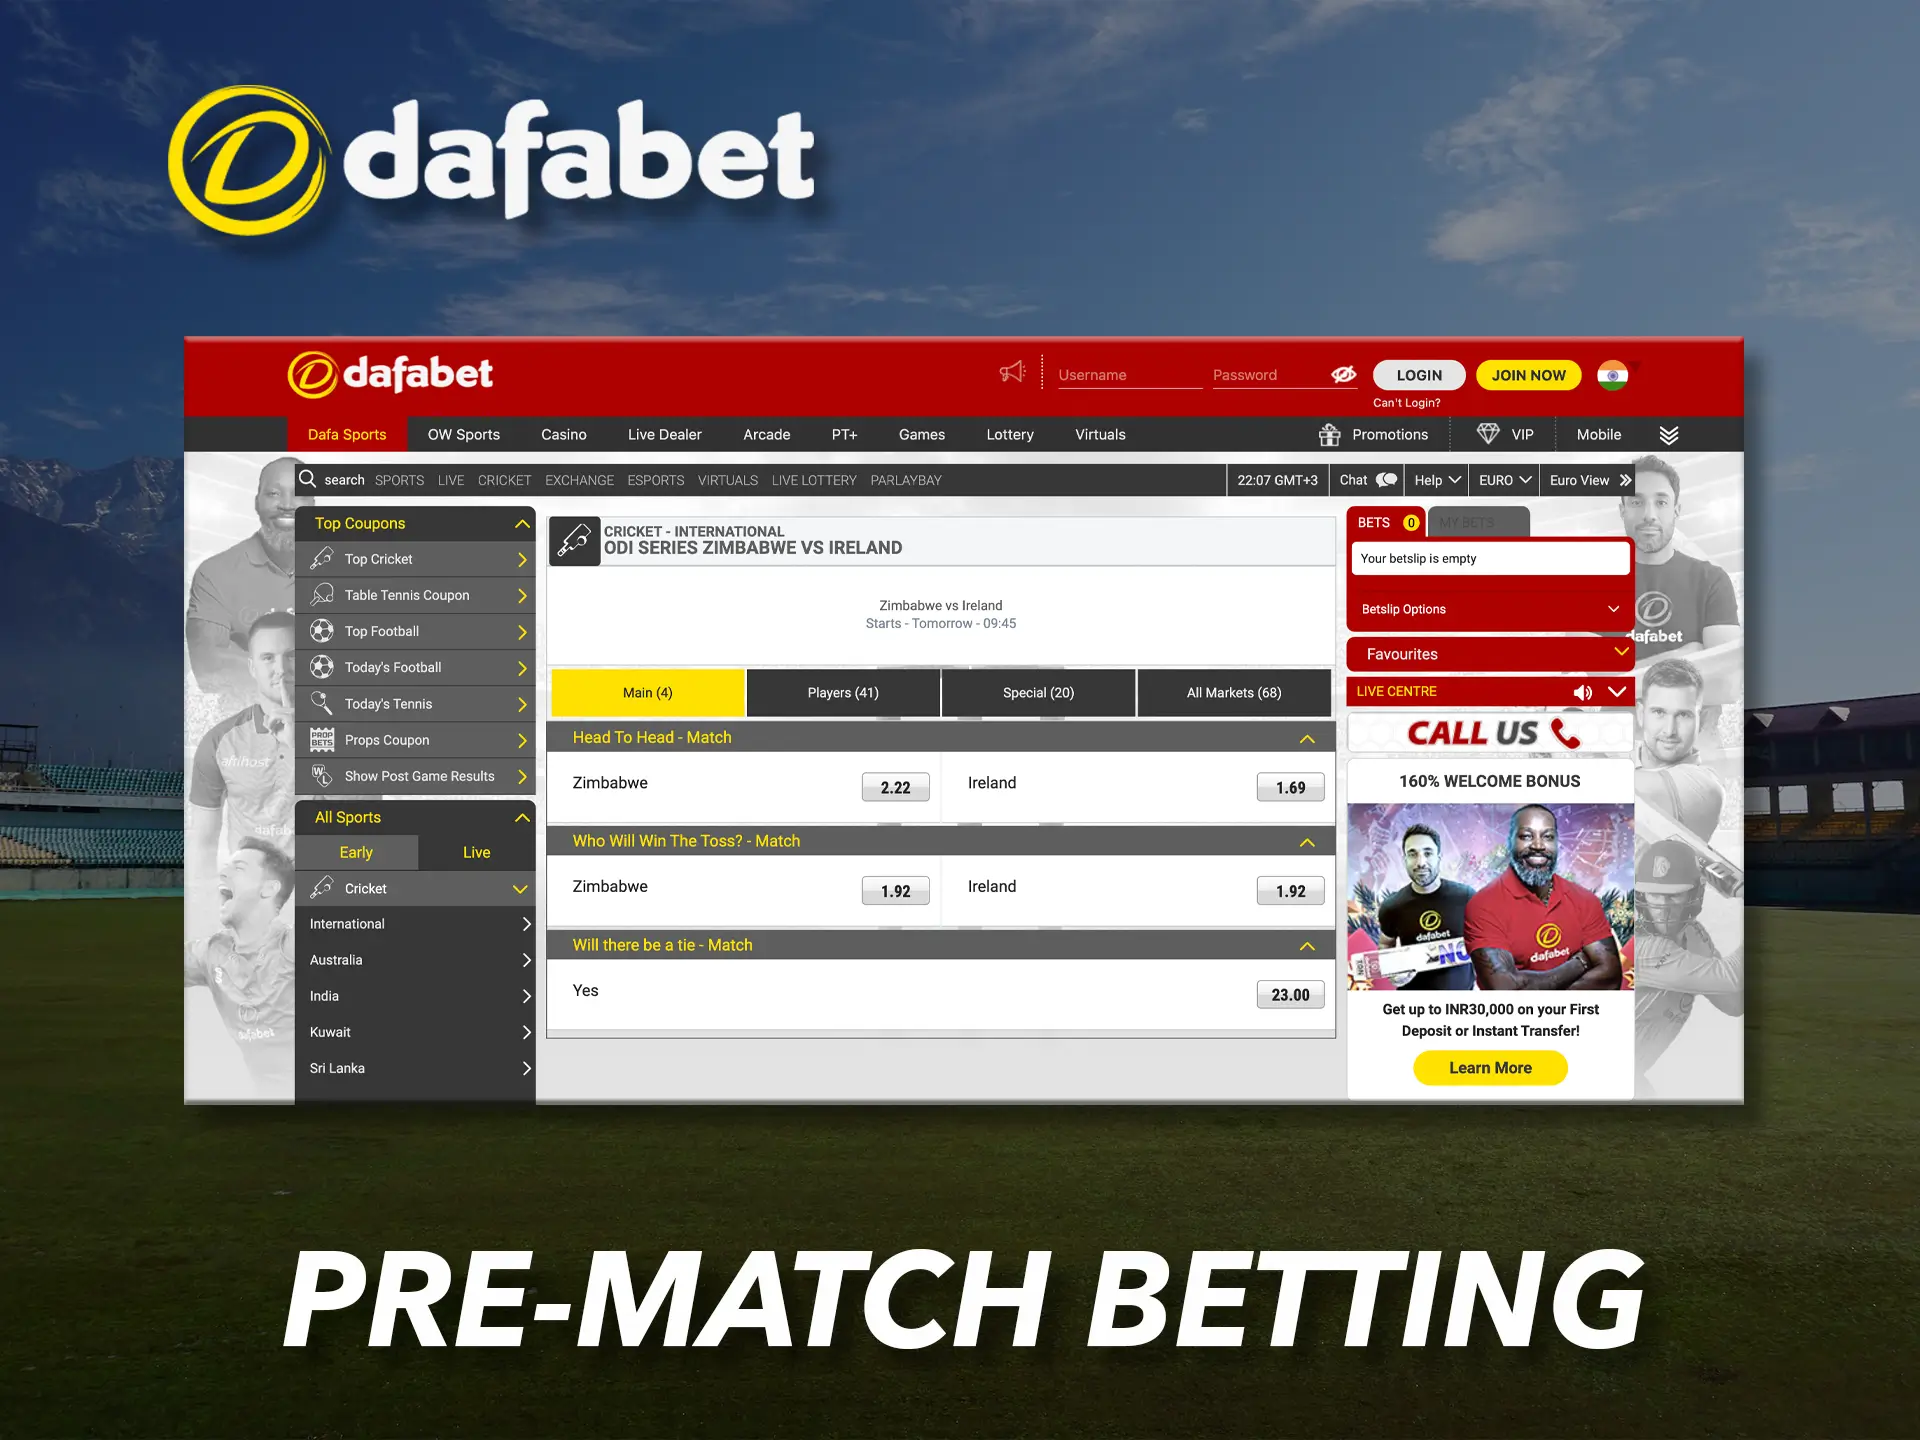 The most generous odds can be seen in pre-match betting from Dafabet.